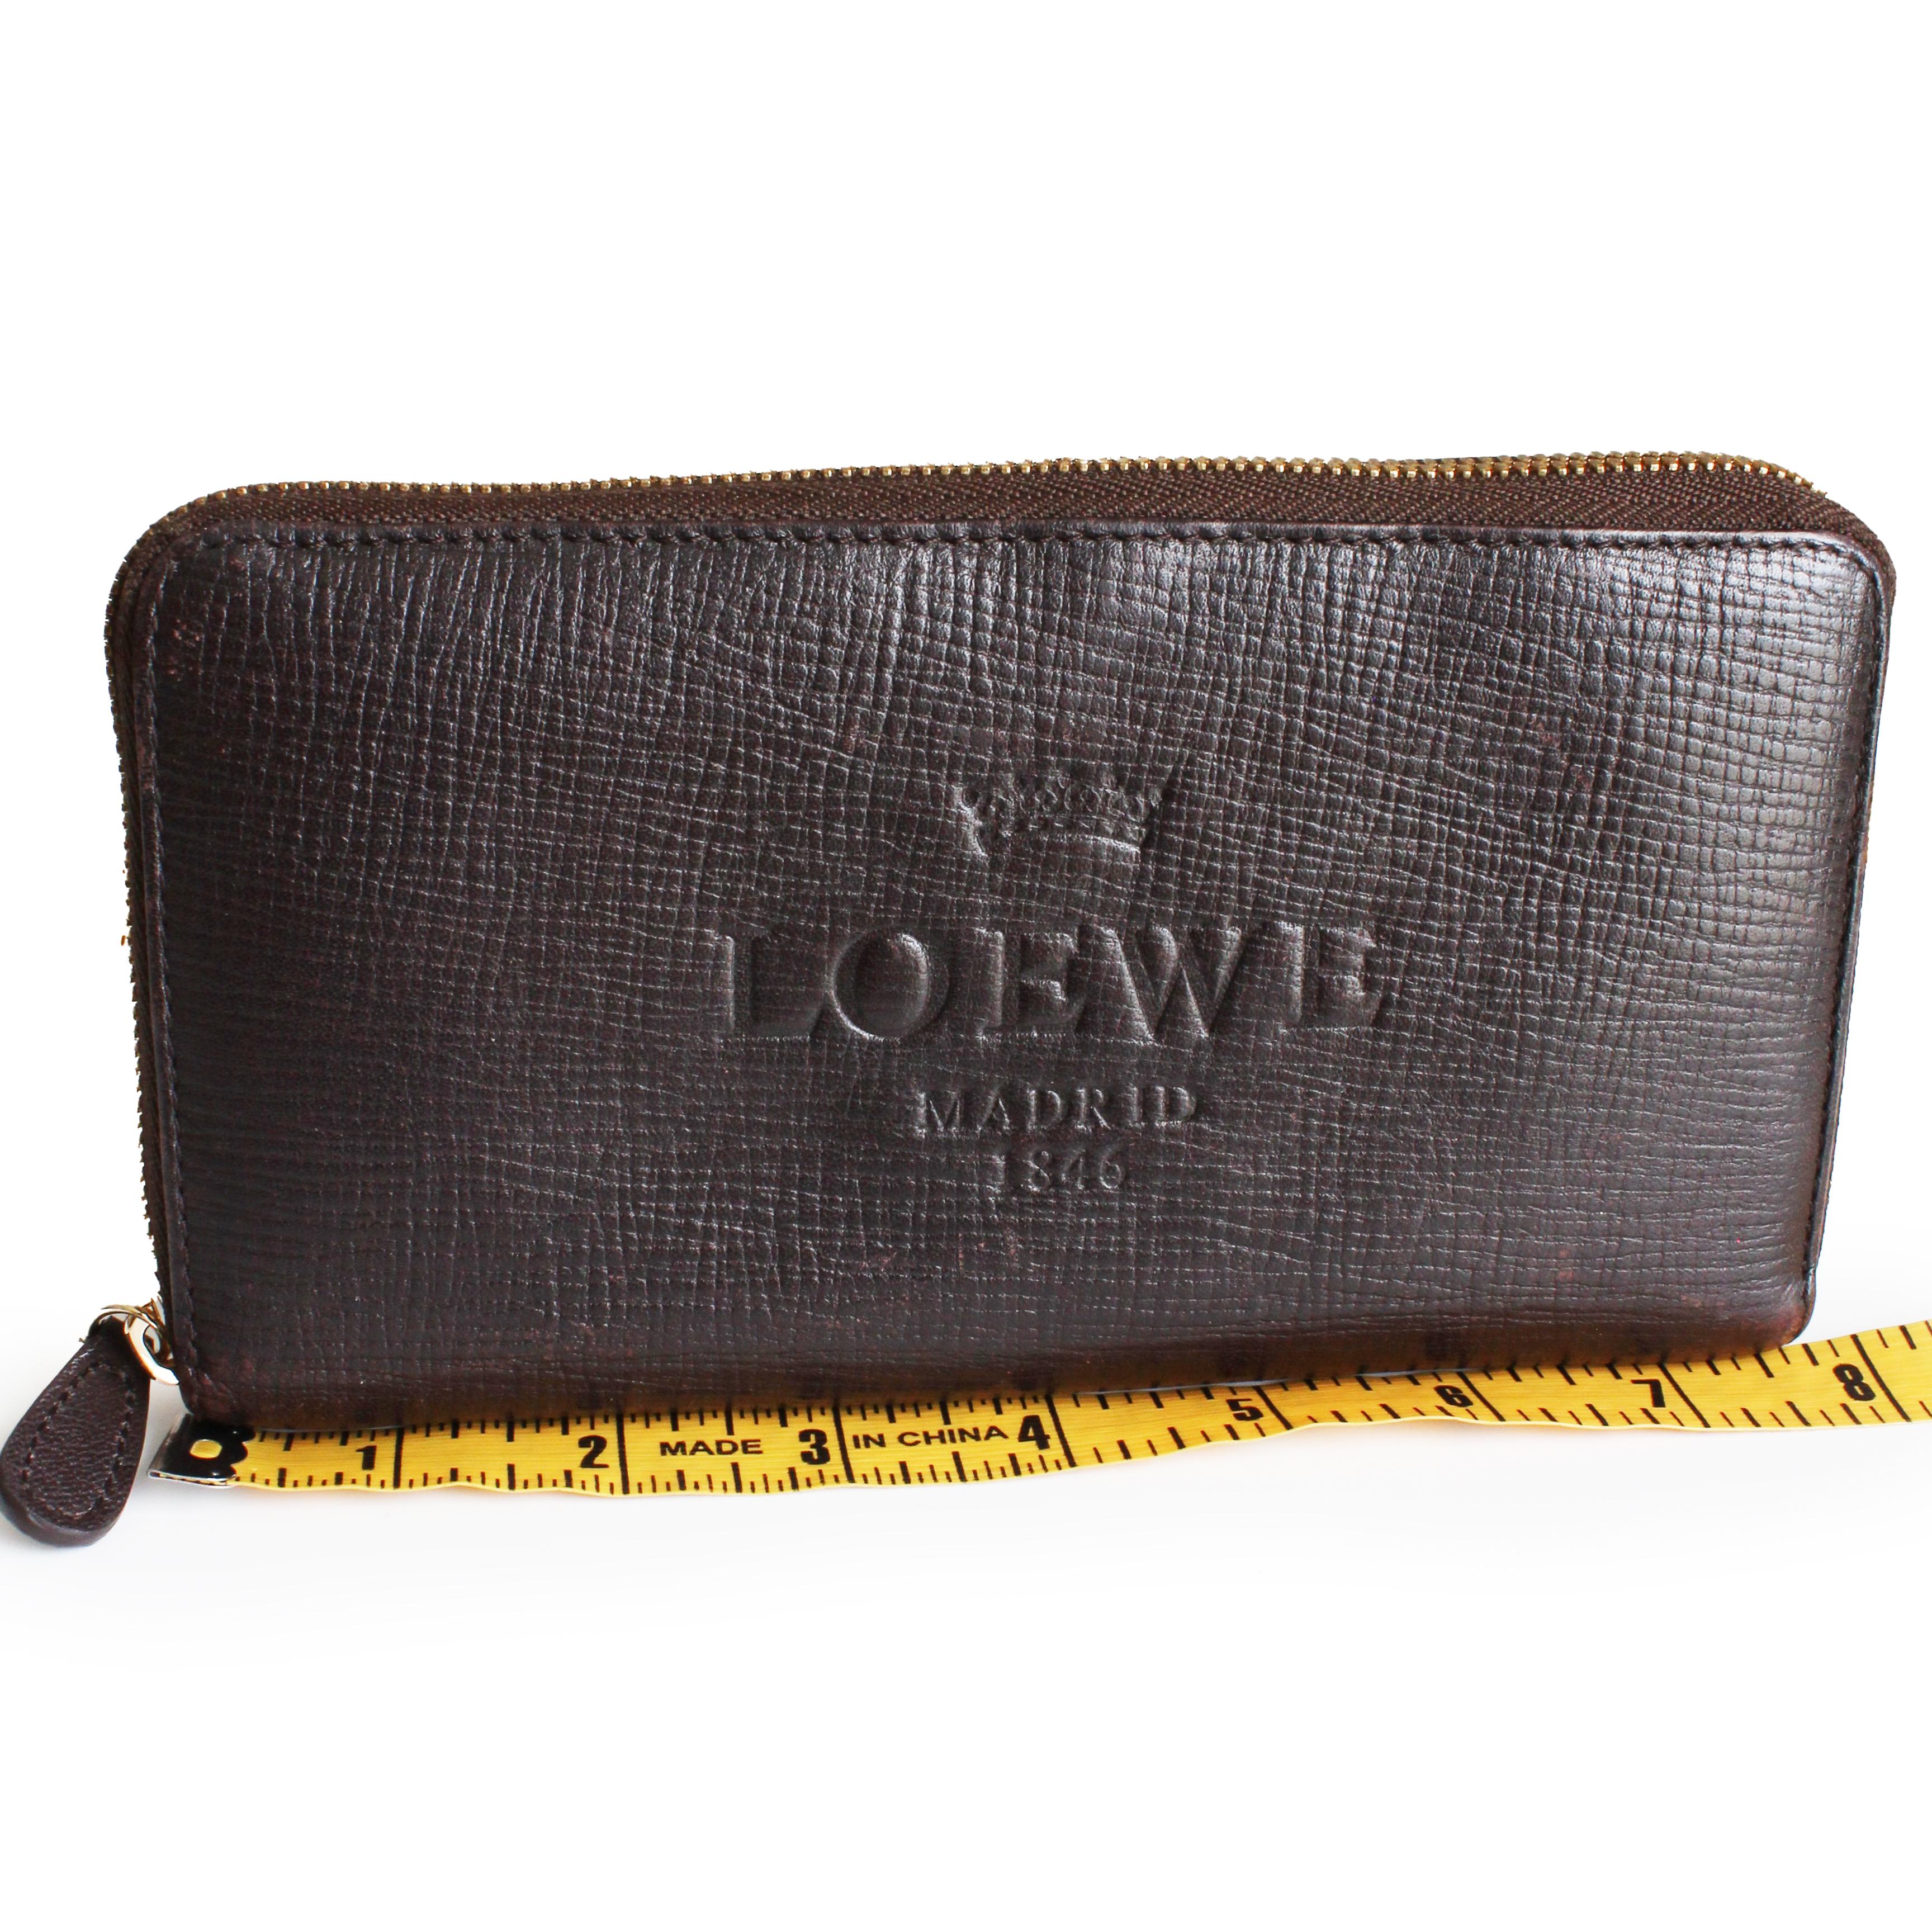 Preowned, vintage zippy wallet by LOEWE, most likely in the 90s.  Made from a textured Epi leather in brown, it features a zip-around closure with leather pull tab. The interior is lined in brown leather with one center zip section, 16 card slots